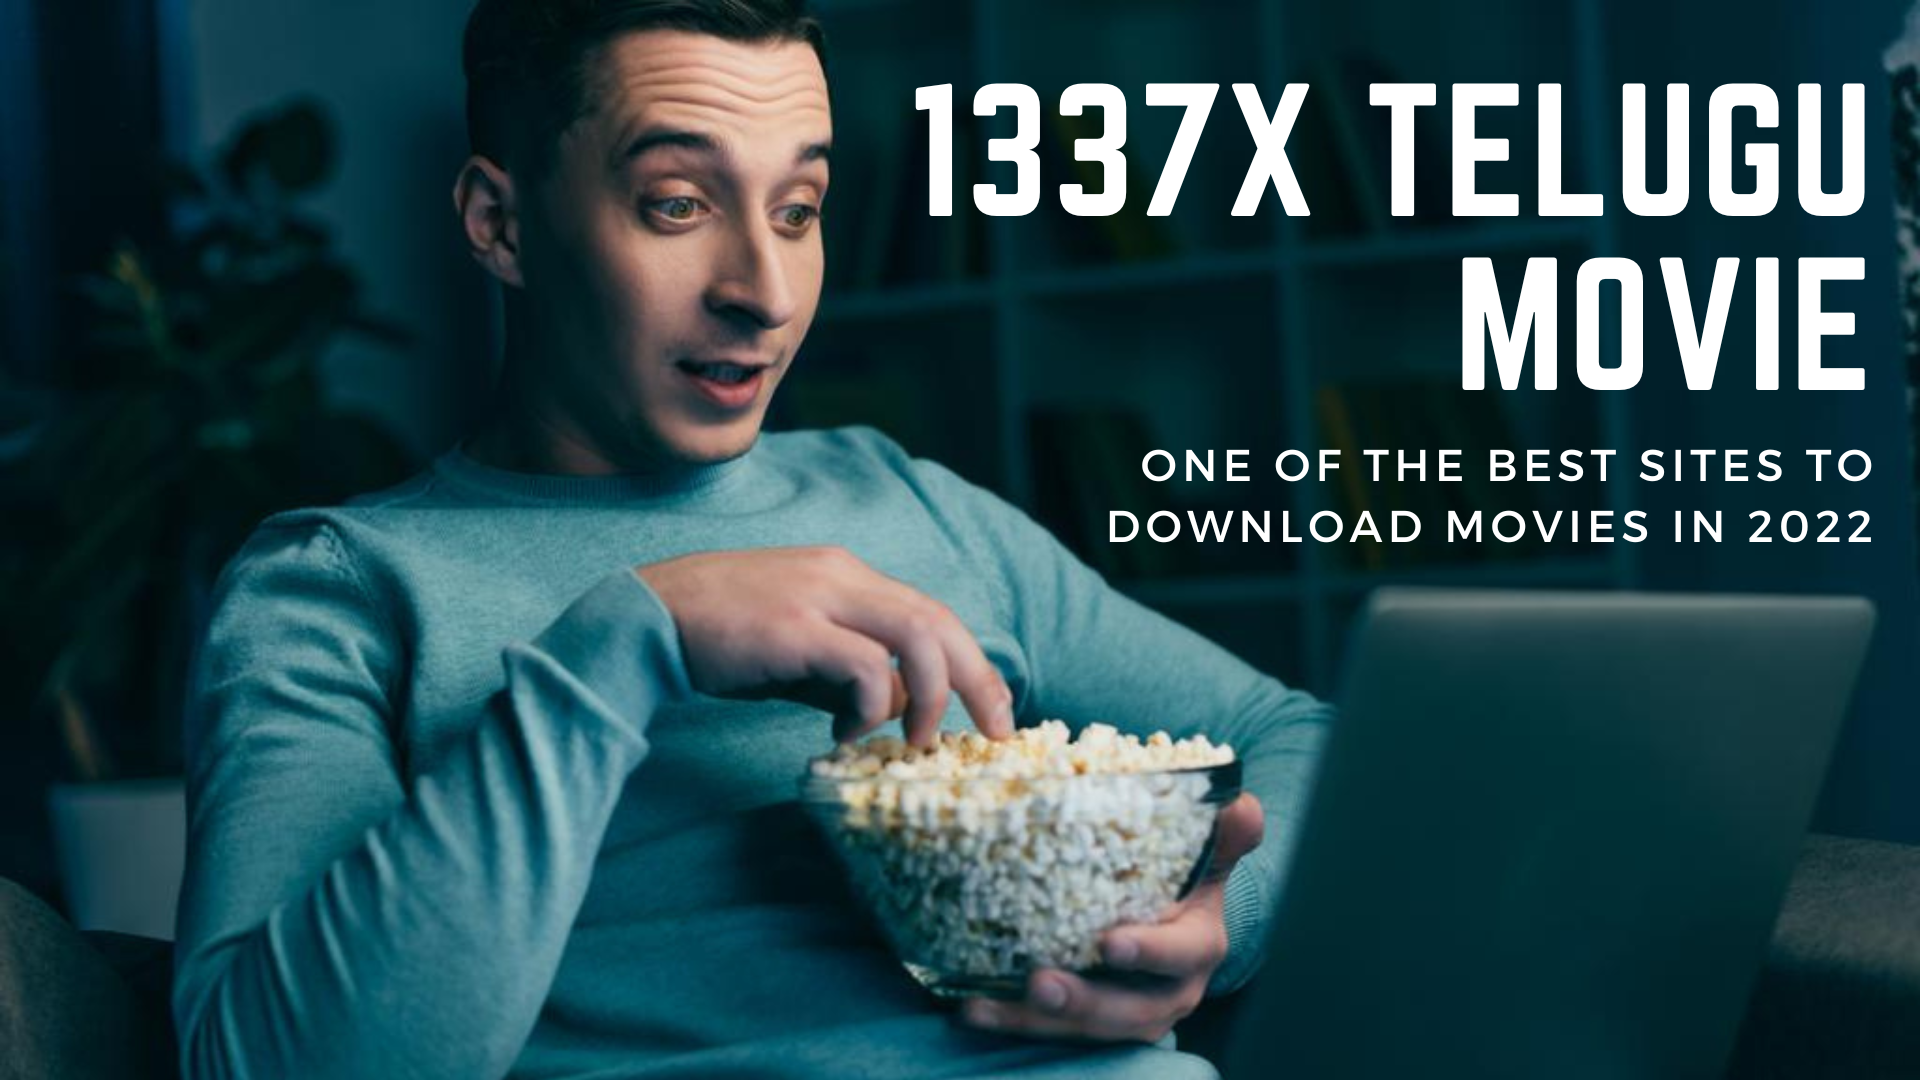 1337x Telugu Movie - One Of The Best Sites To Download Movies In 2022